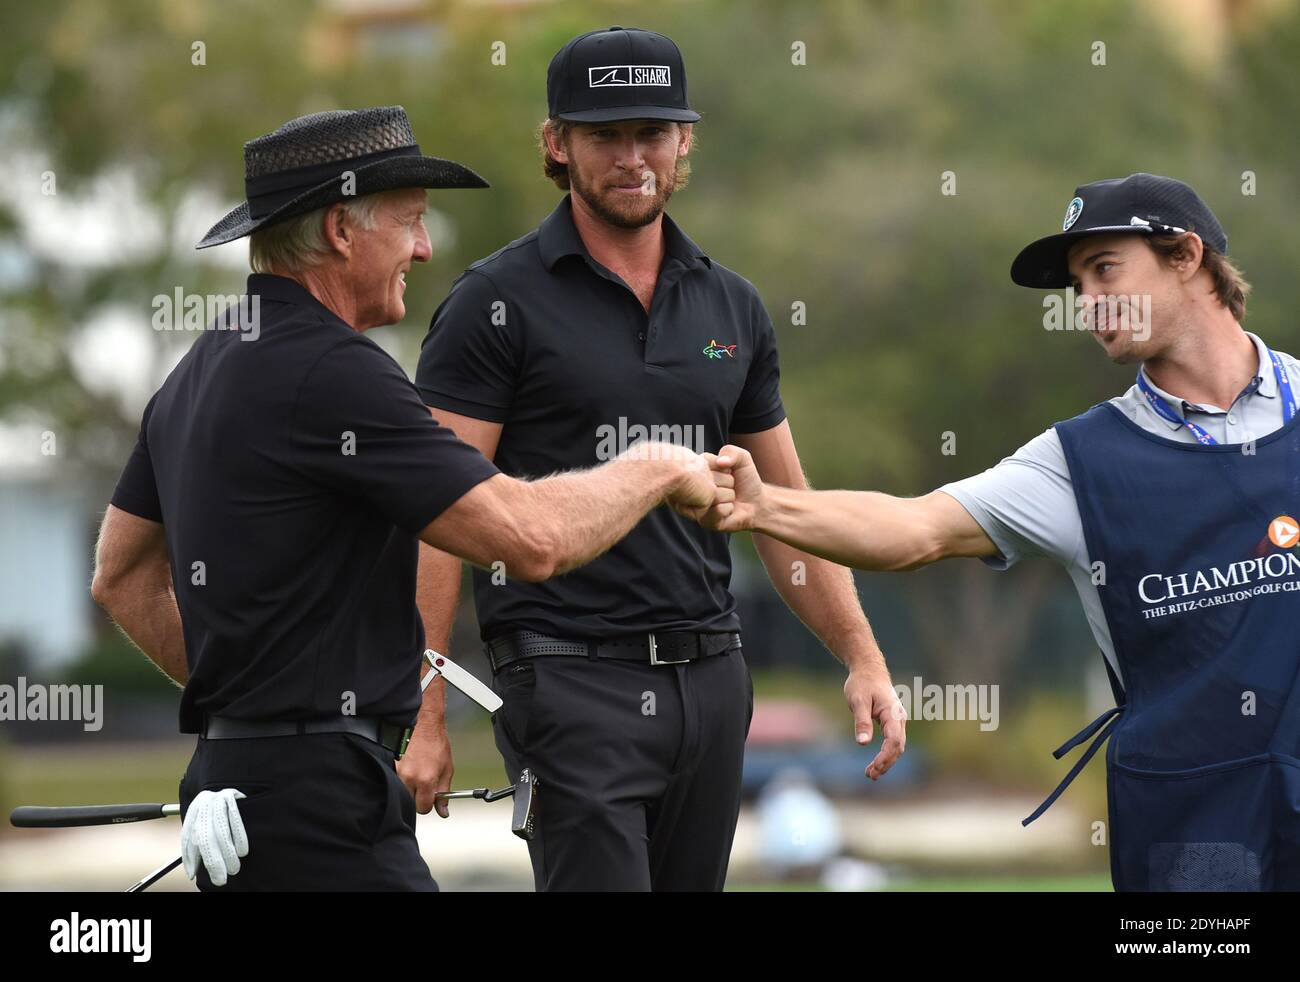 December 20, 2020 - Orlando, Florida, United States - Australian Greg Norman (left) and his son, Greg Norman Jr. fist bump with a caddie after completing the final round at the PNC Championship golf tournament at the Ritz-Carlton Golf Club on December 20, 2020 in Orlando, Florida. On Christmas Day, Norman posted a photo to Instagram from a hospital bed where he was being treated for COVID-19 symptoms. NormanÕs son also posted a photo to Instagram, stating that he and his fiancee have tested positive for the COVID-19 virus. (Paul Hennessy/Alamy) Stock Photo